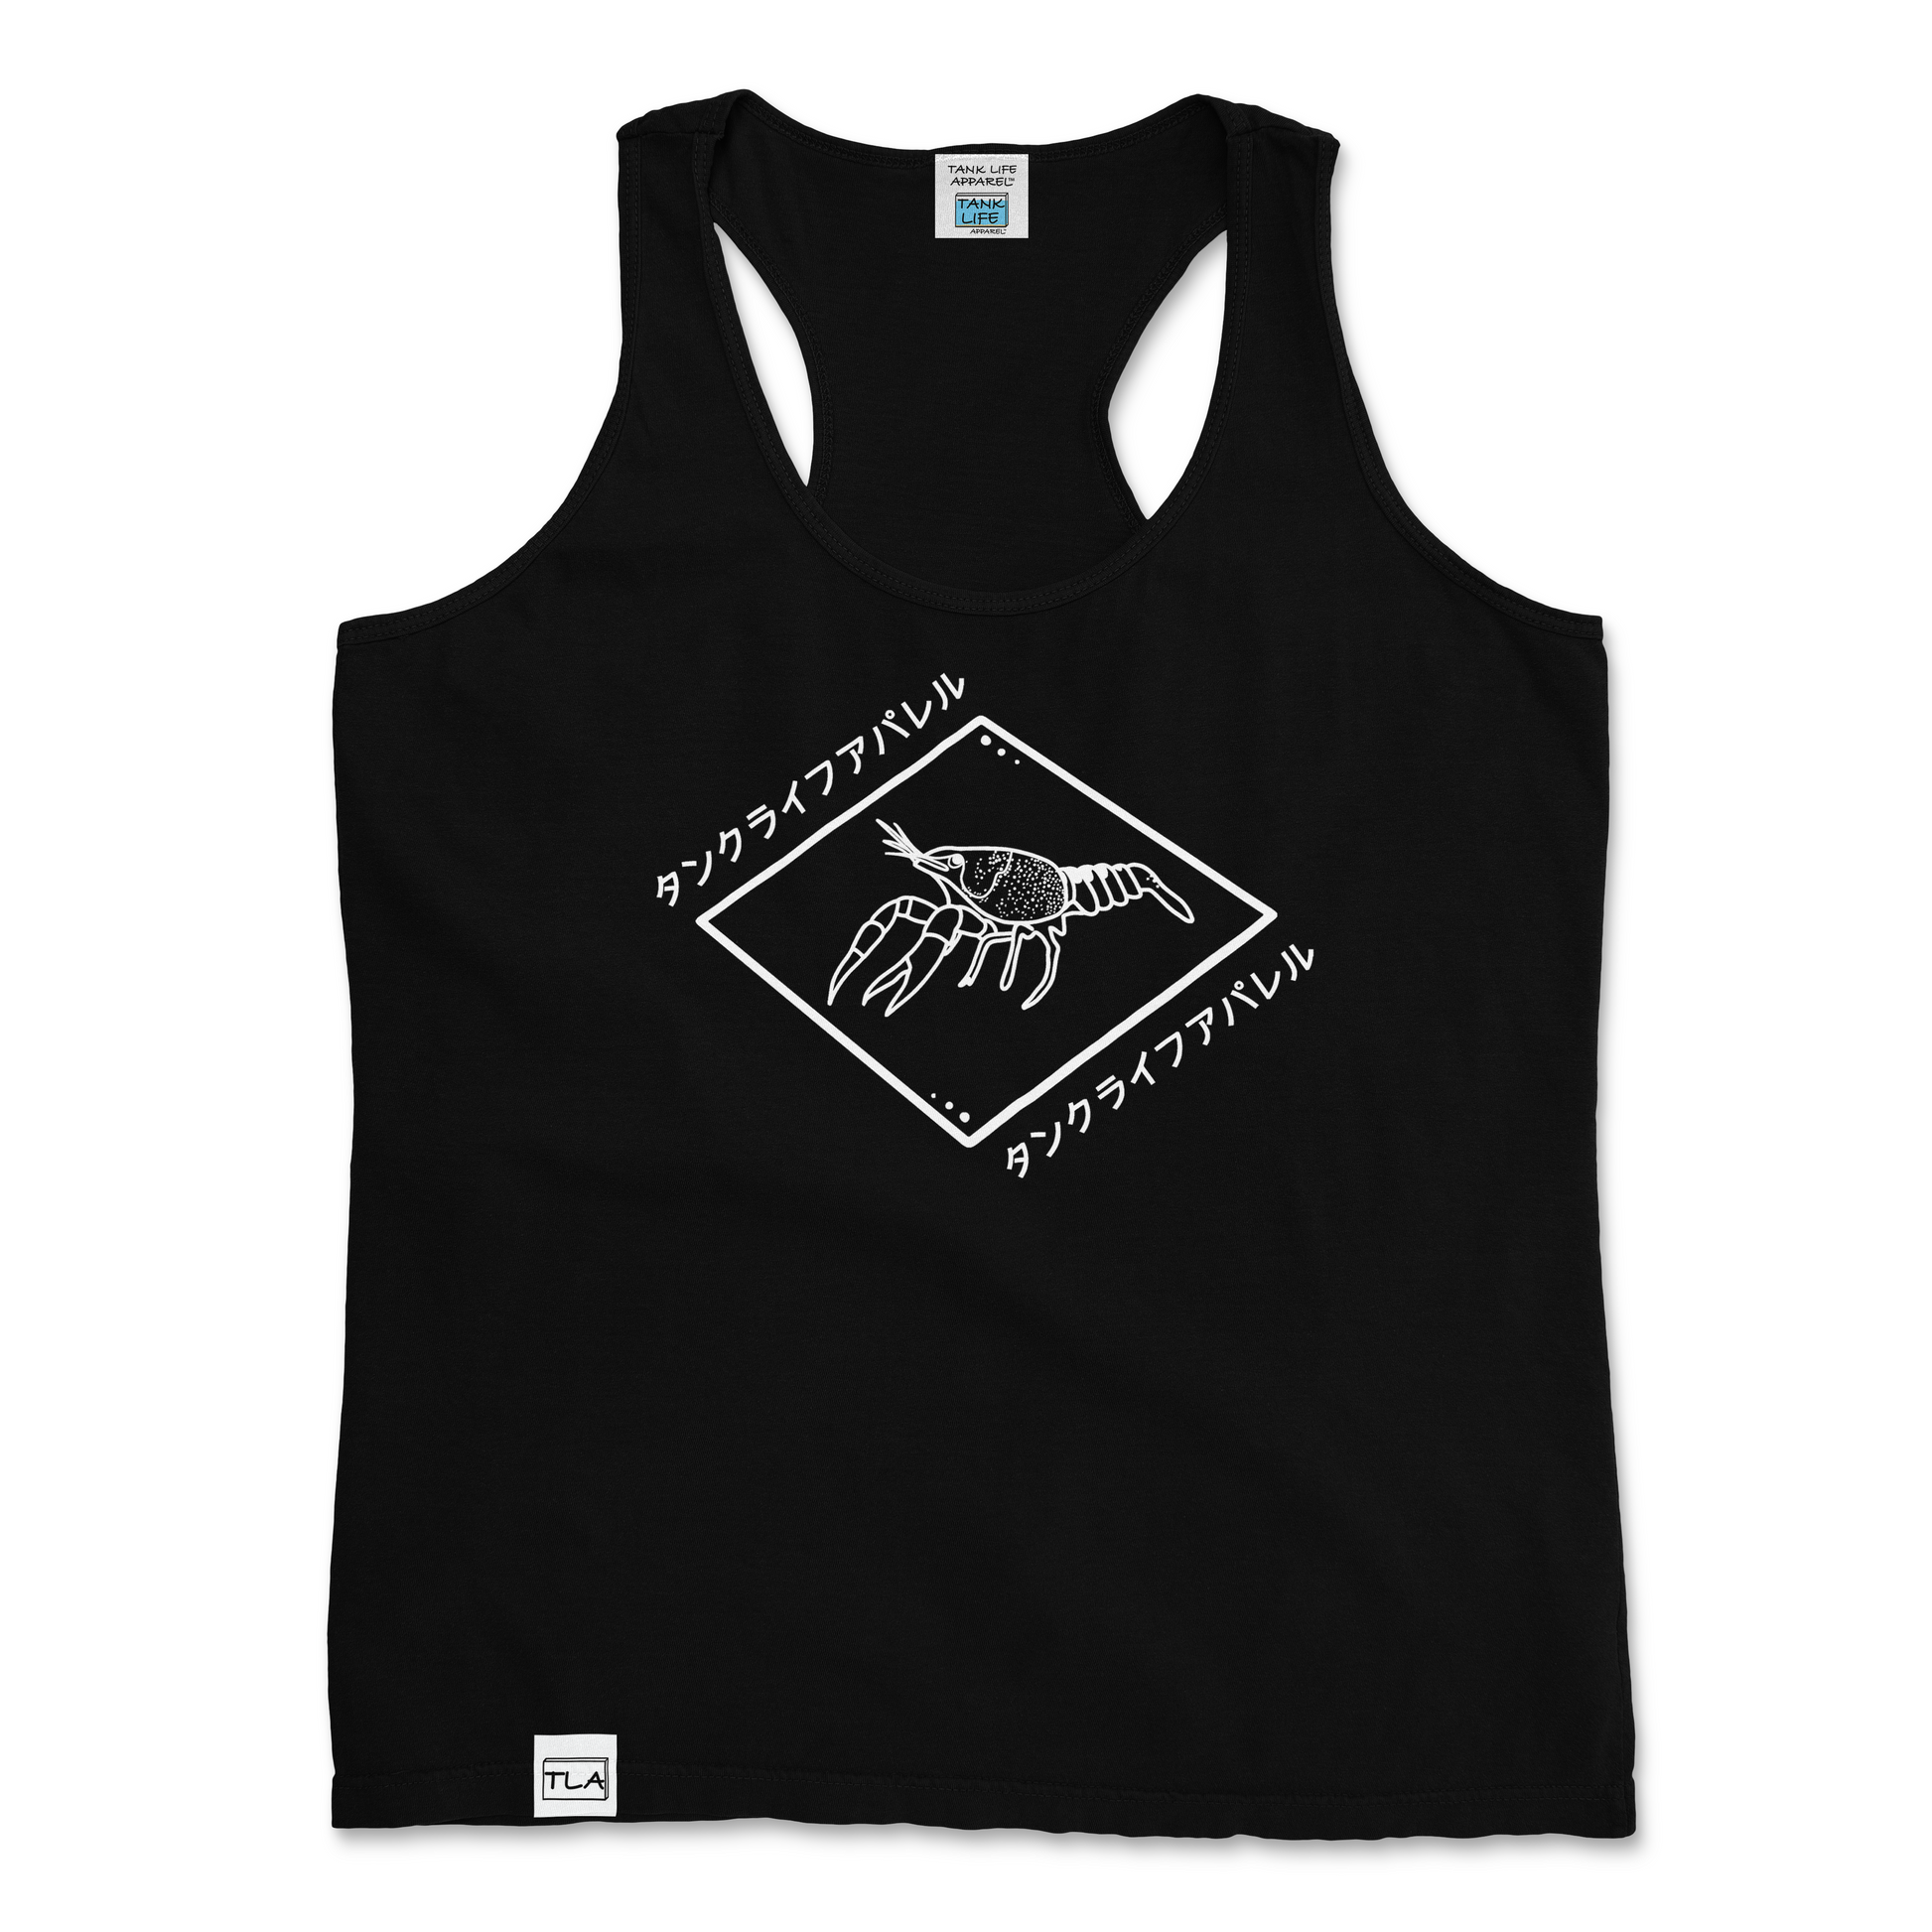 The Tank Life Apparel crayfish design with Japanese letters spelling tank life apparel on a women's tank top. Crawfish/ crayfish in white lines in a diamond shape with japanese letters. Blue cray fish.